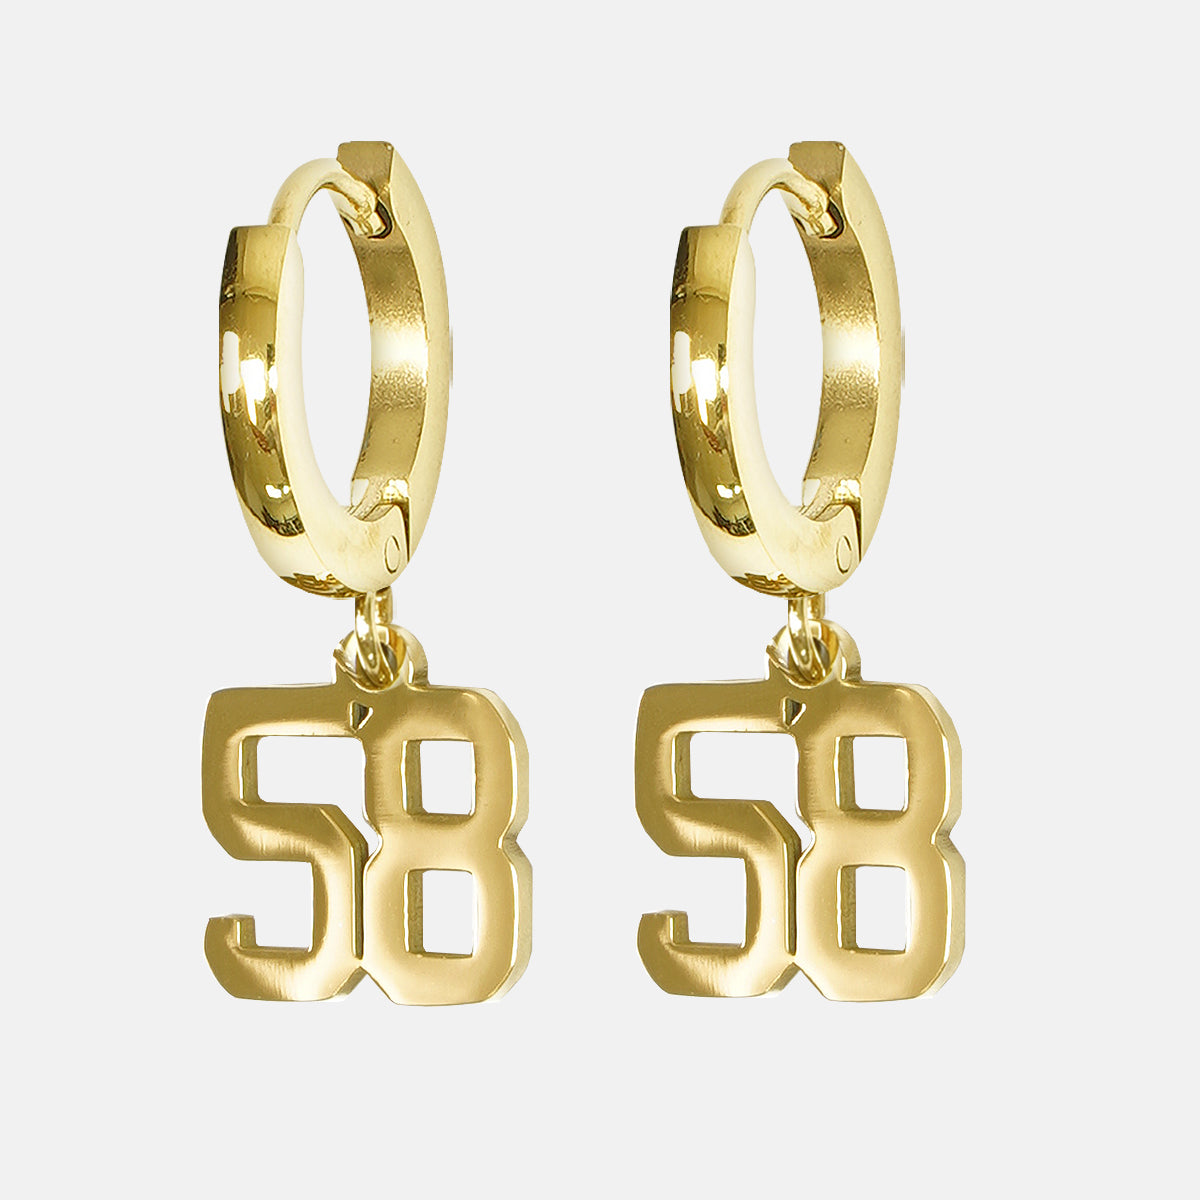 58 Number Earring - Gold Plated Stainless Steel